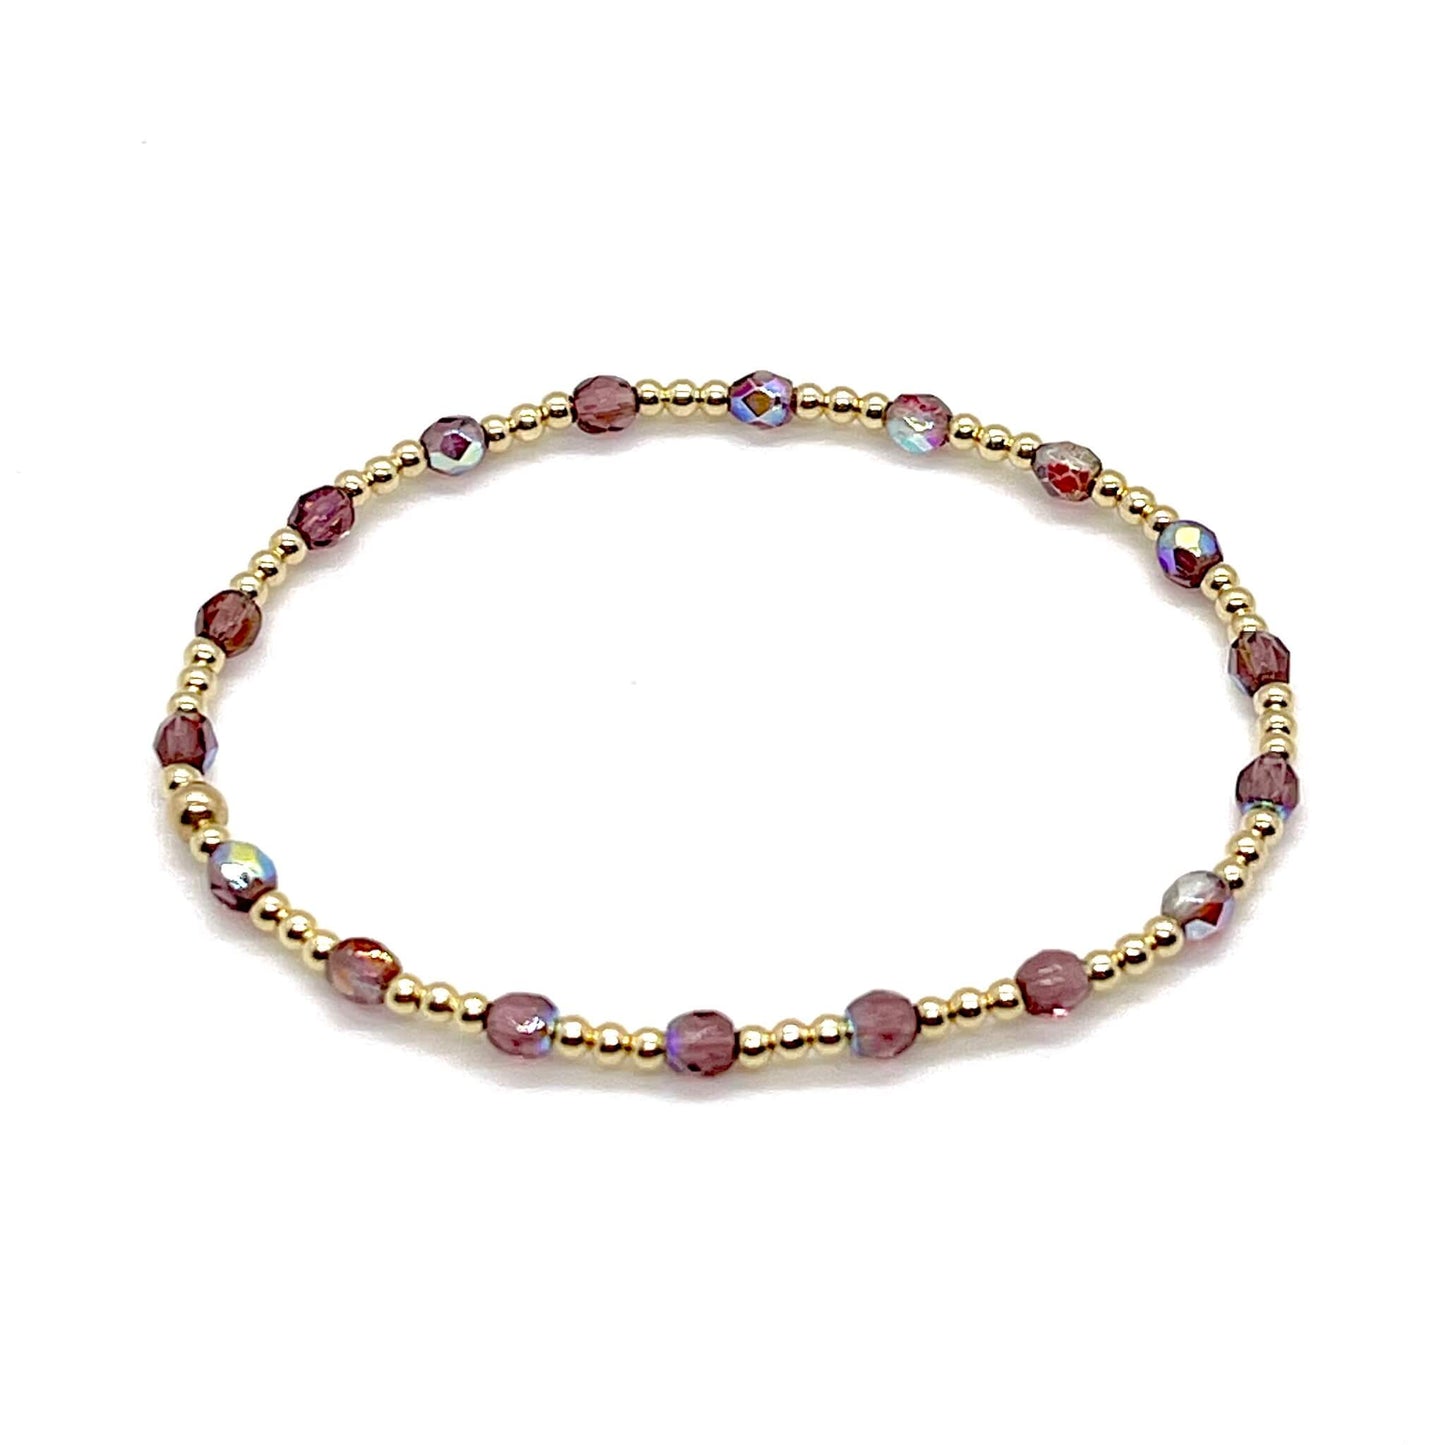 Amethyst crystal bracelet with gold beads for women. Small beaded stretch bracelet handmade in NYC.